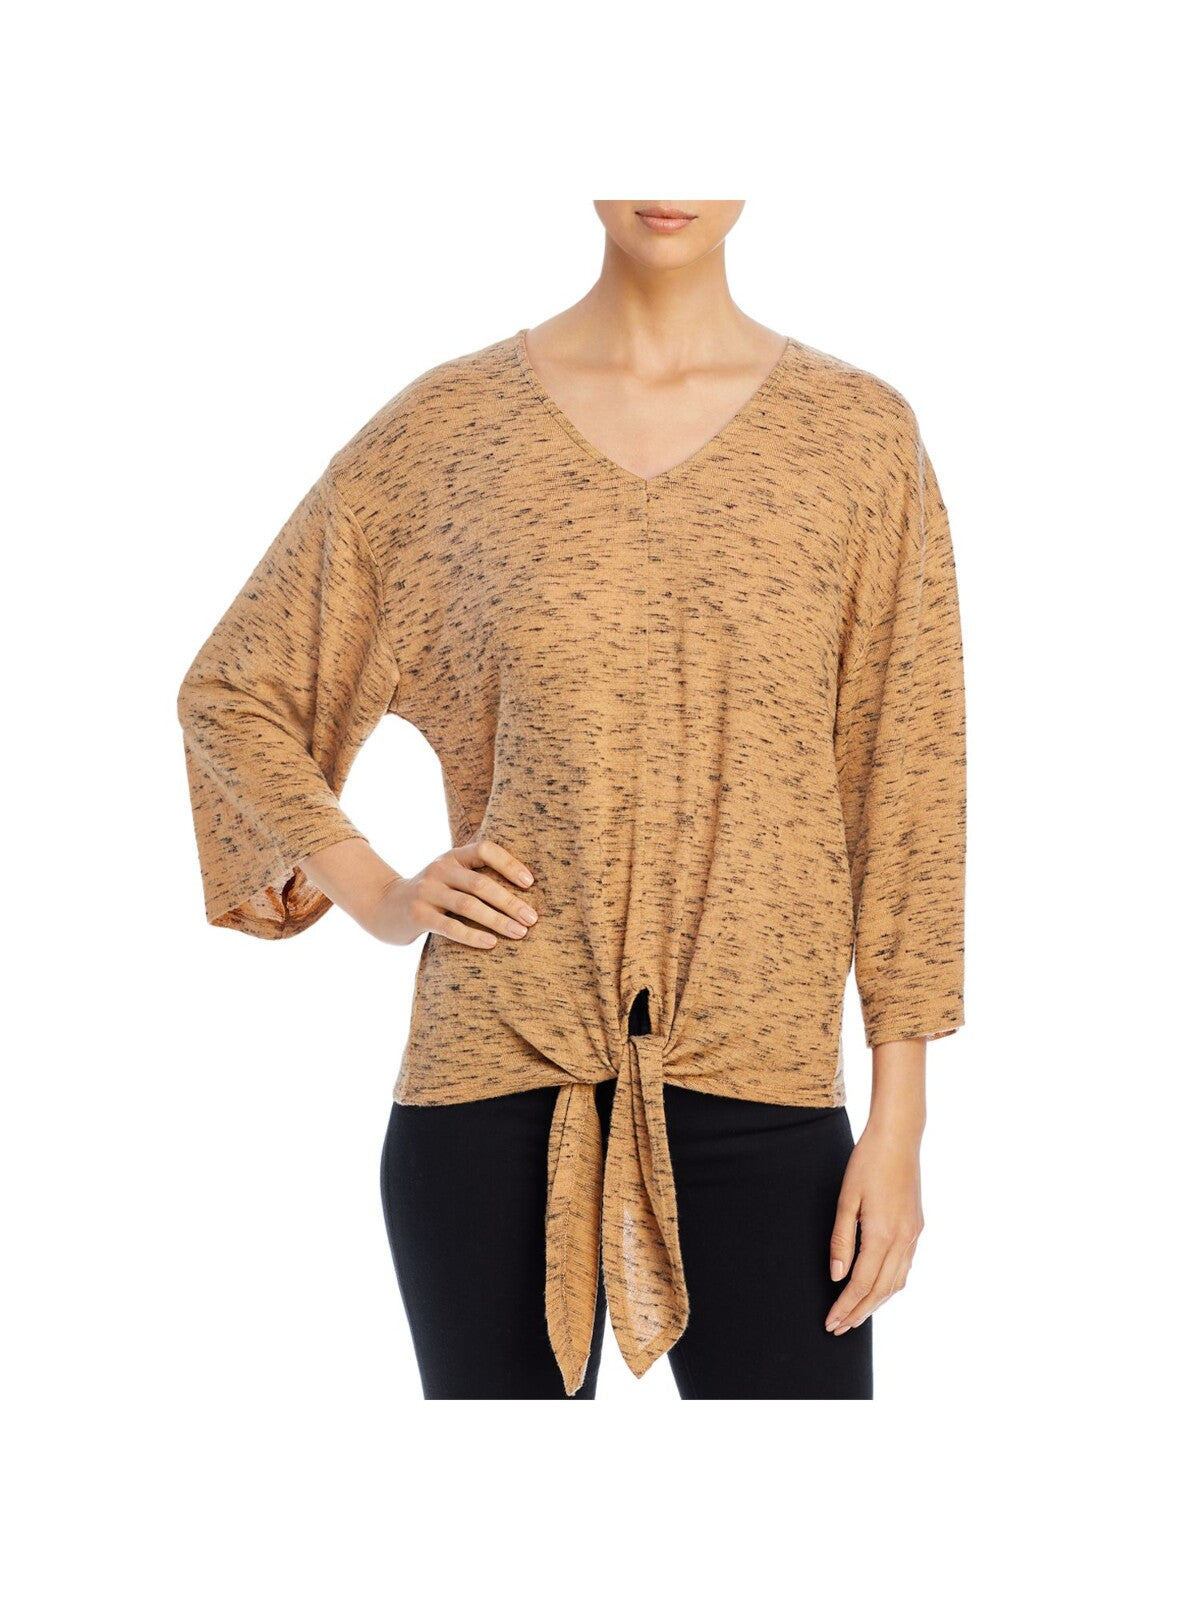 A + A COLLECTION Womens 3/4 Sleeve V Neck Sweater